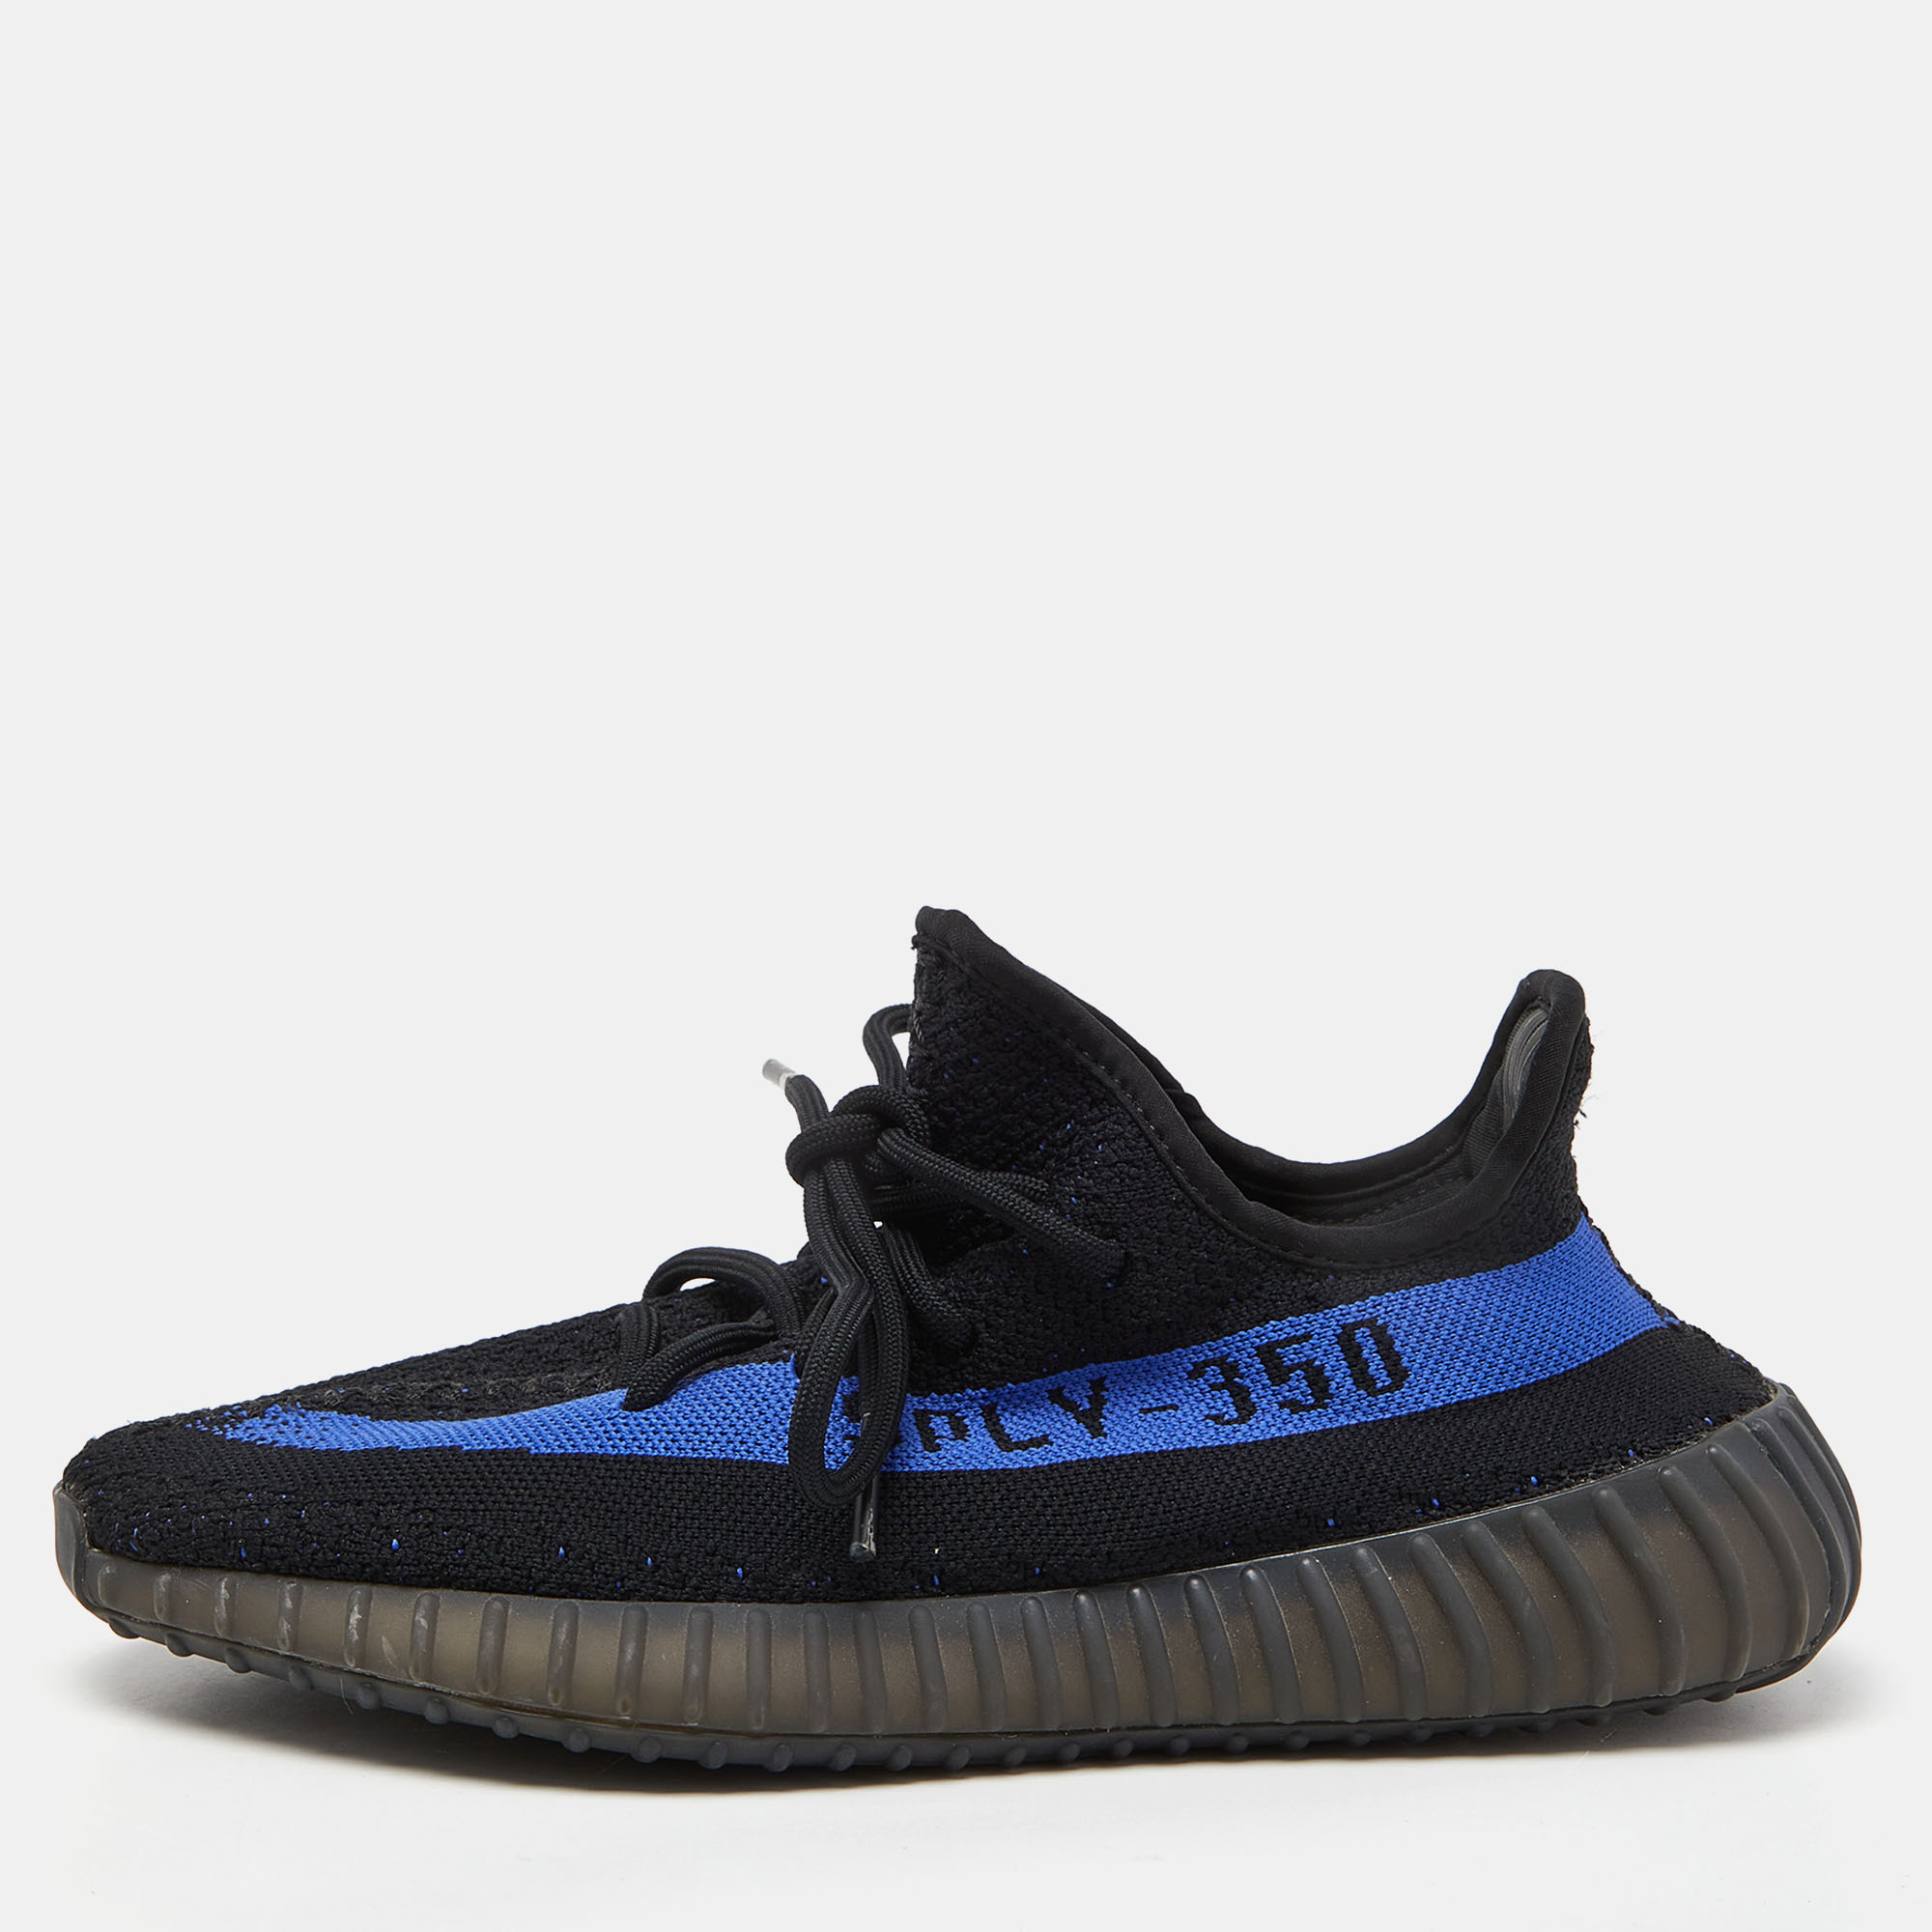 Pre-owned Yeezy X Adidas Black/blue Knit Fabric Boost 350 V2 Dazzling Blue Sneakers Size 40 1/3